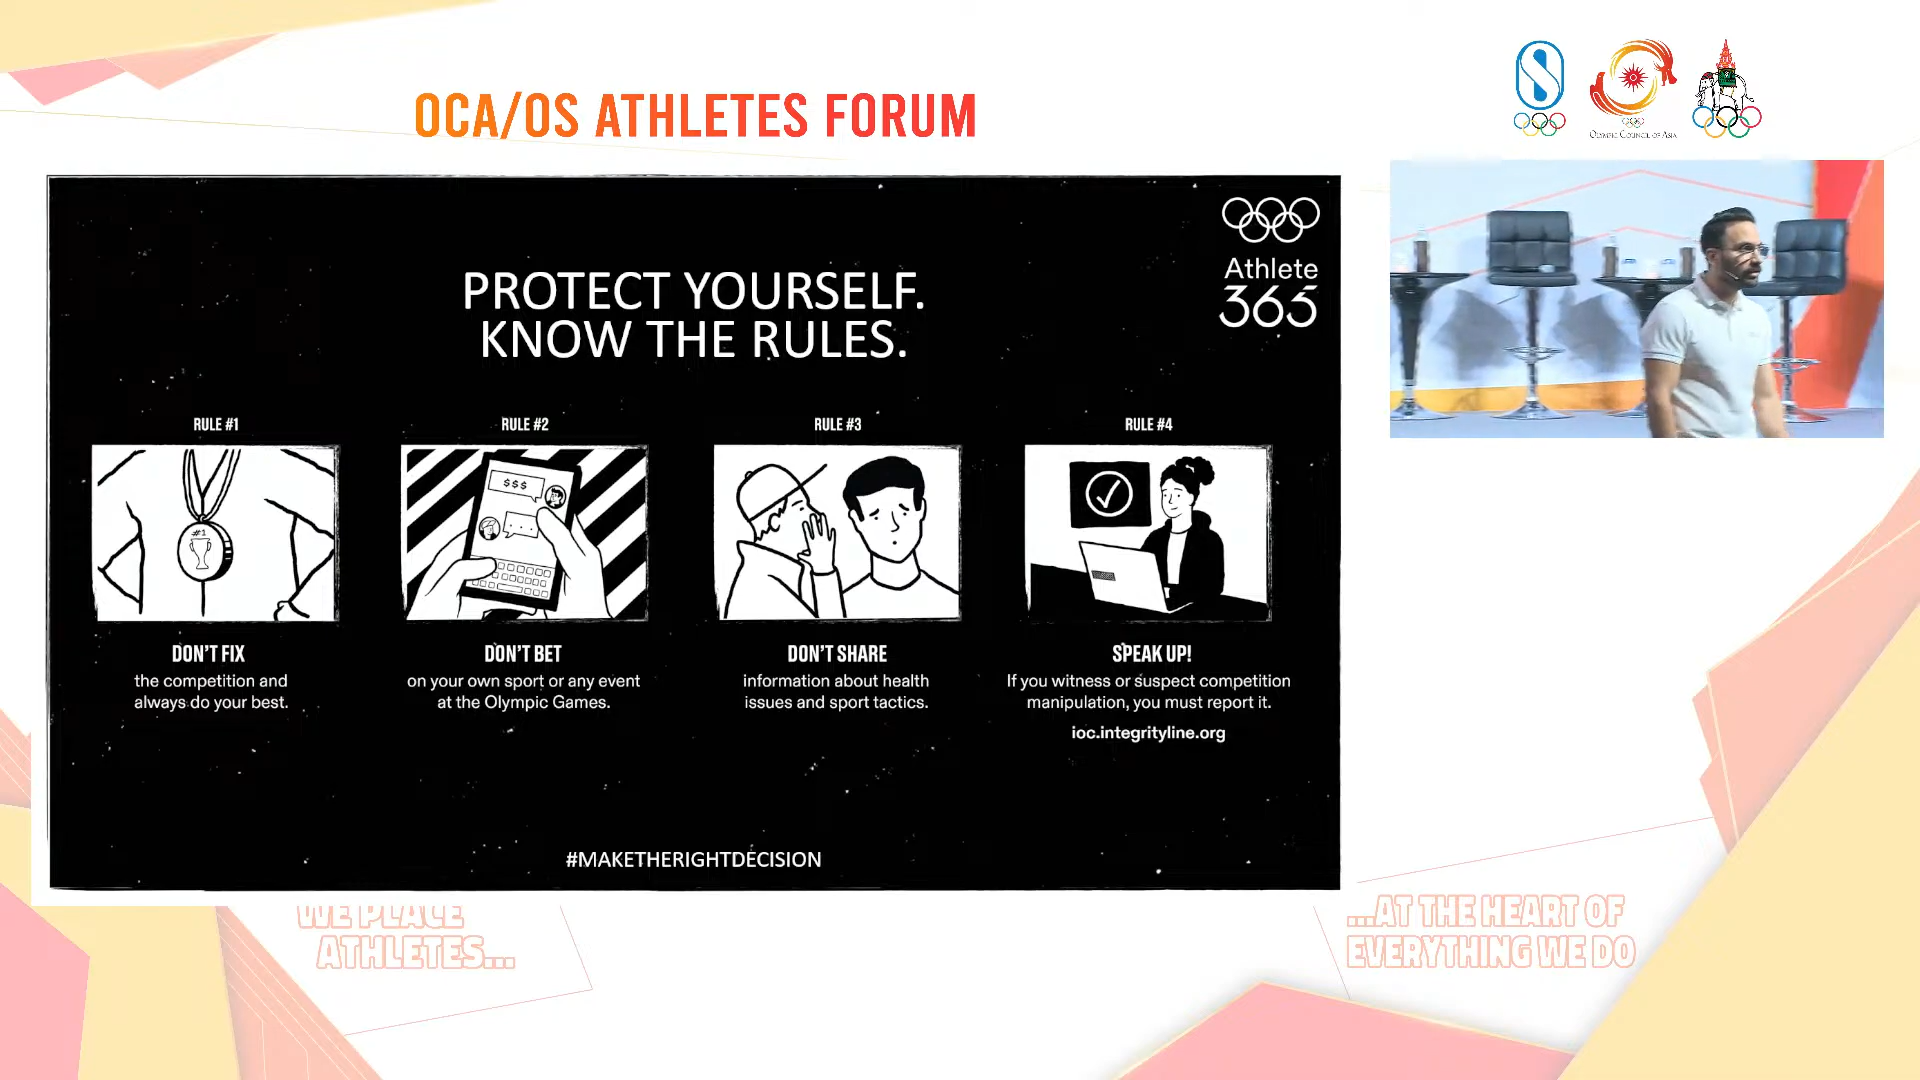 Participants were urged to follow four rules to help prevent the manipulation of competition at the OCA Athletes' Forum ©OCA